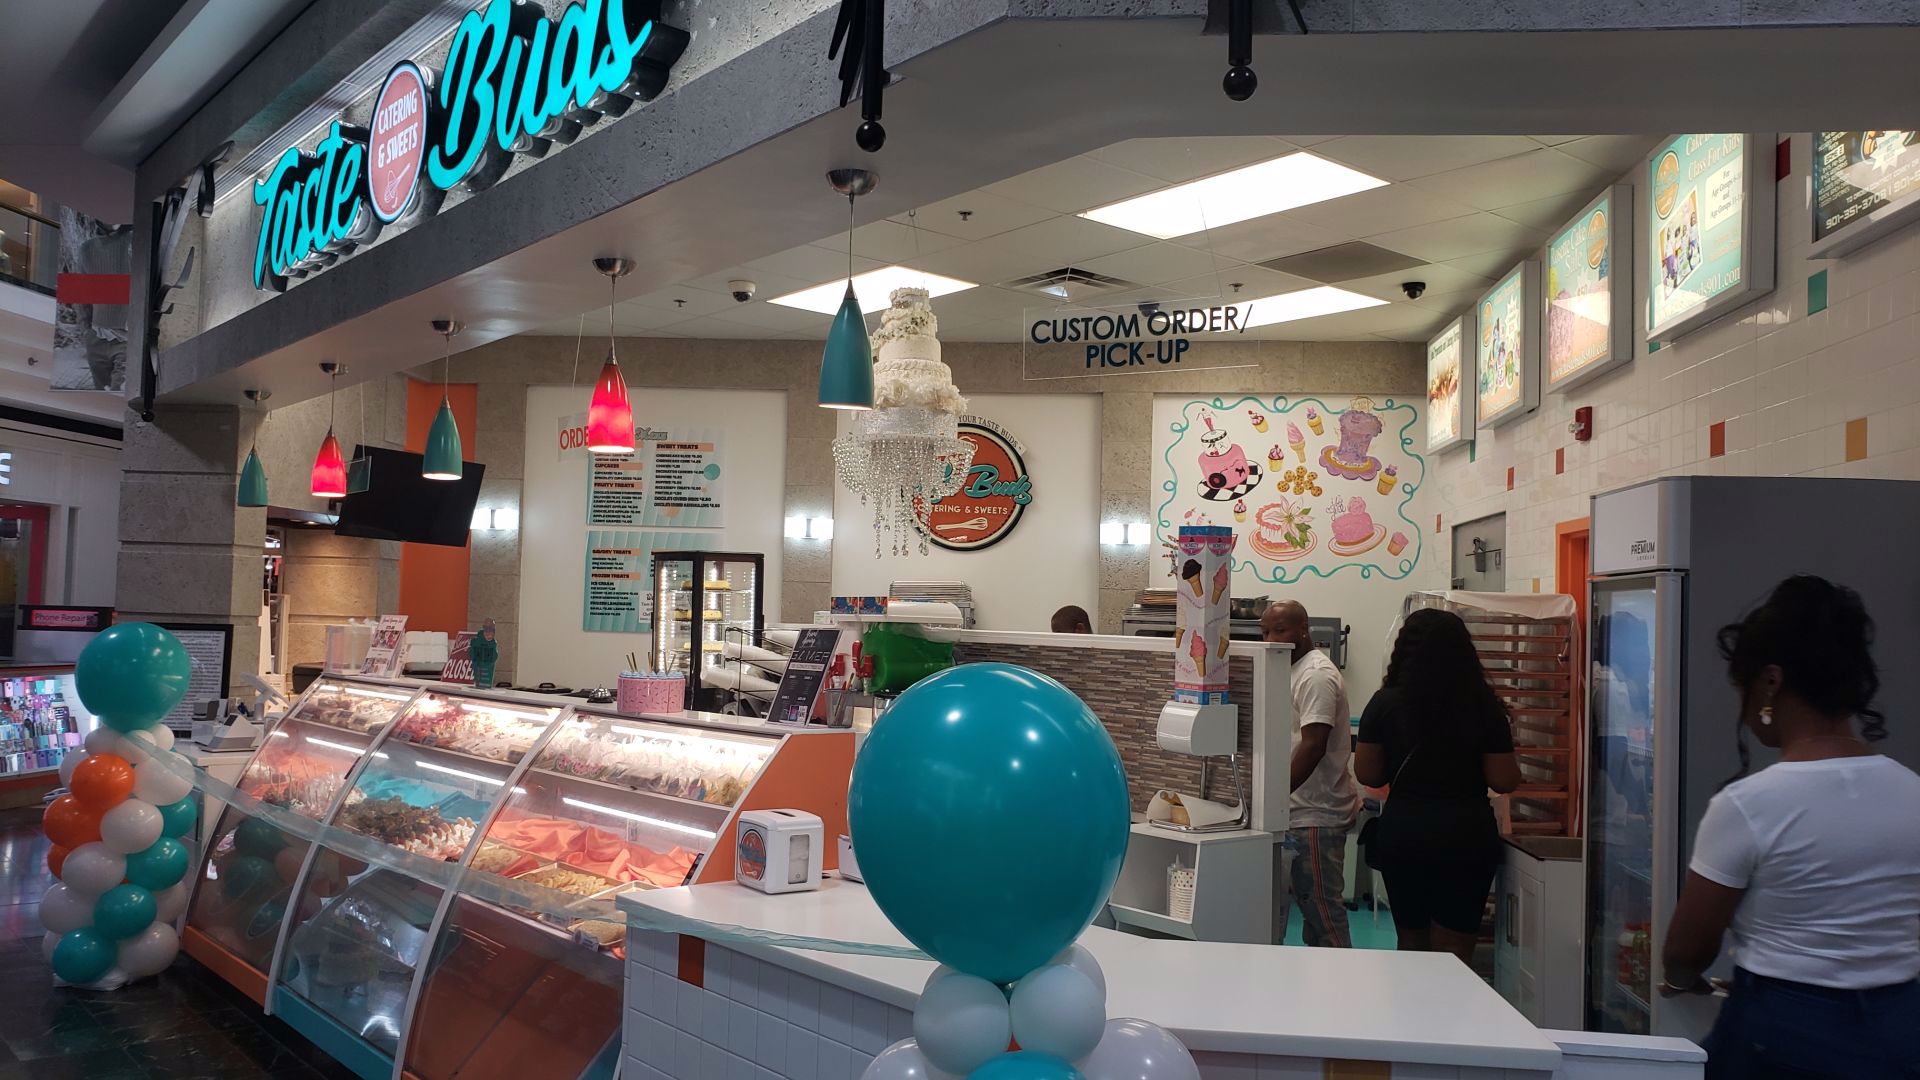 Taste Buds Catering and Sweets opens at Oak Court Mall in Memphis